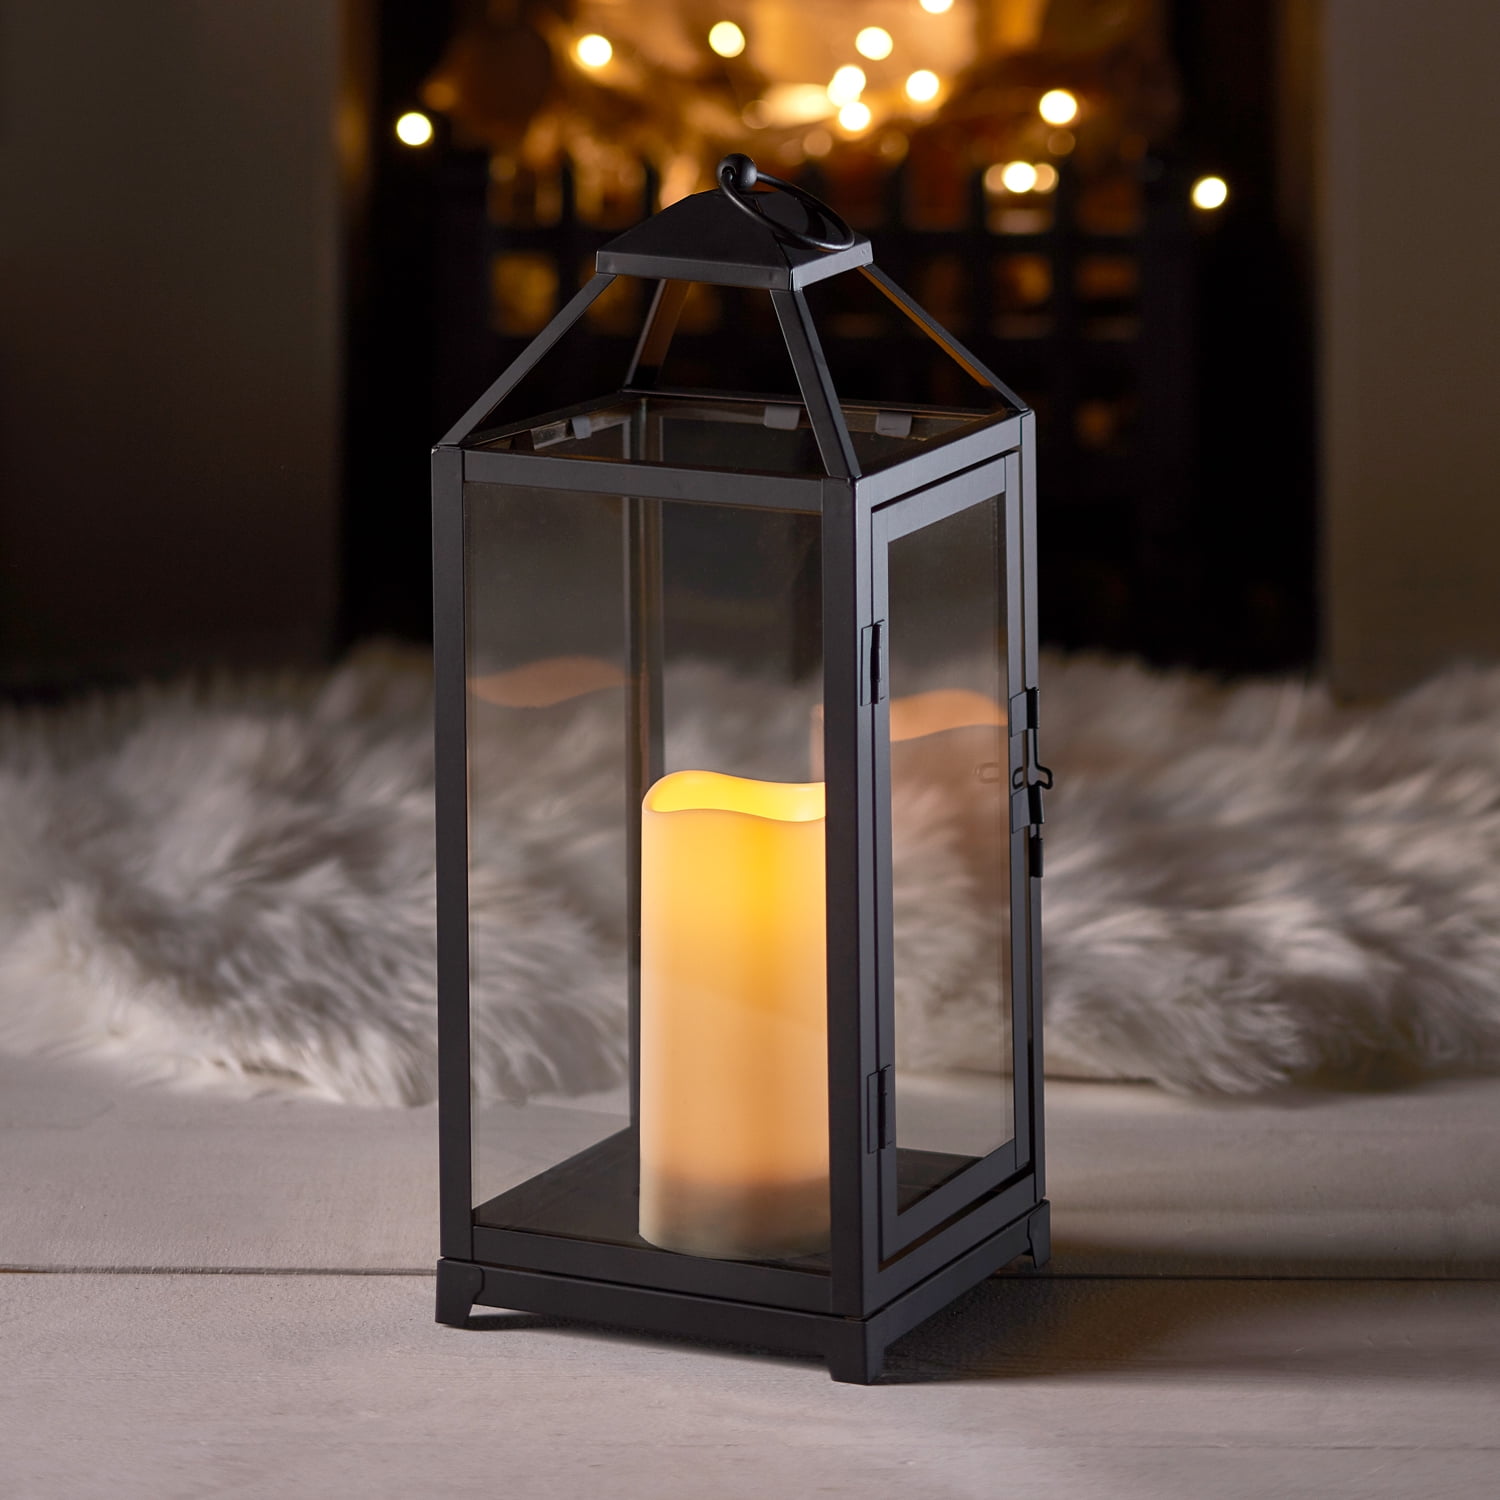 Lights4fun, Inc. 12.5 Black Metal Battery Operated LED Flameless Candle Lantern Light for Indoor & Outdoor Use